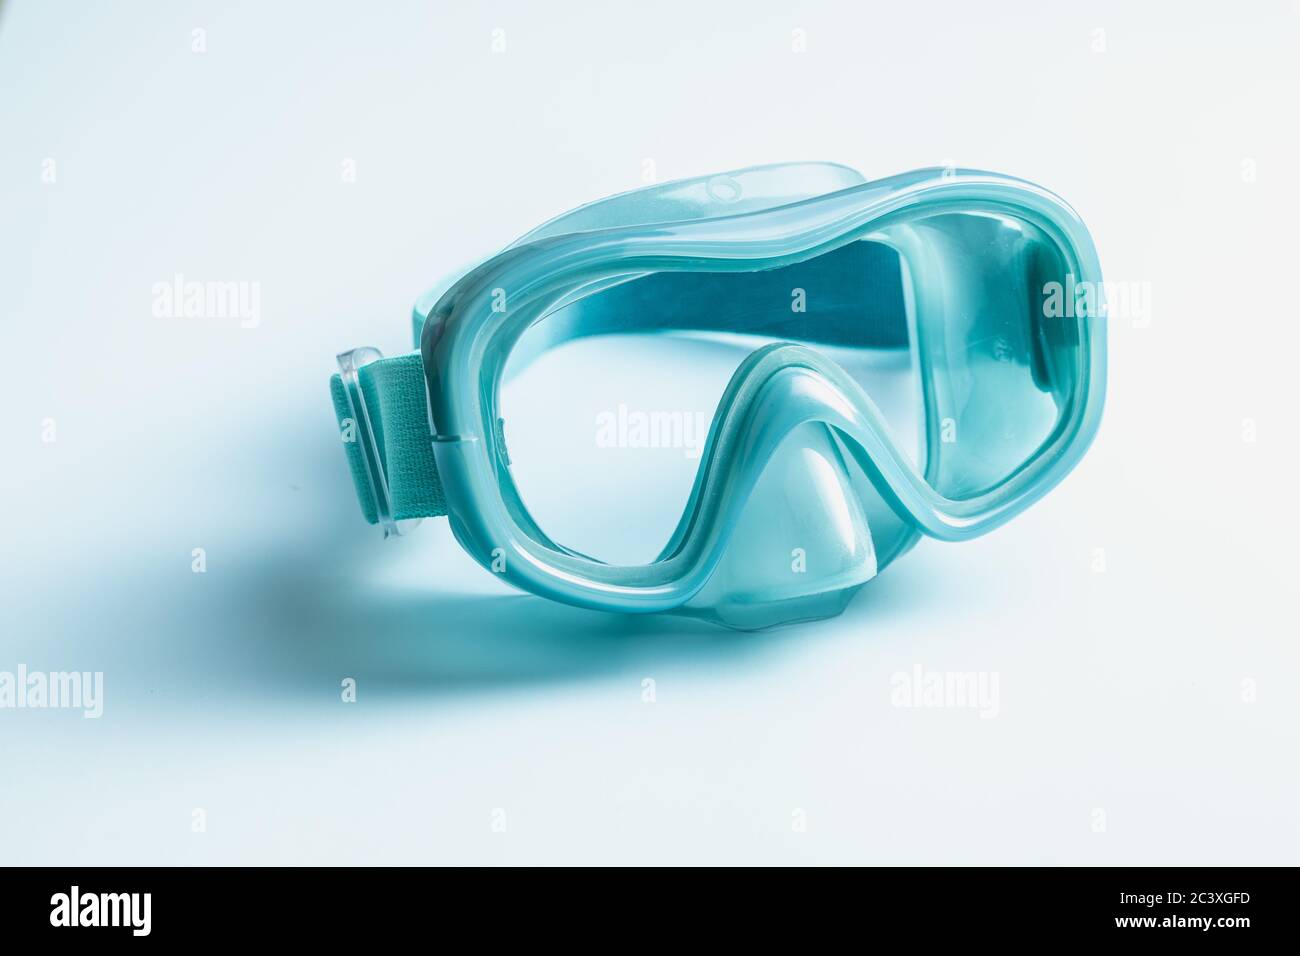 Blue diving mask on blue background. Stock Photo